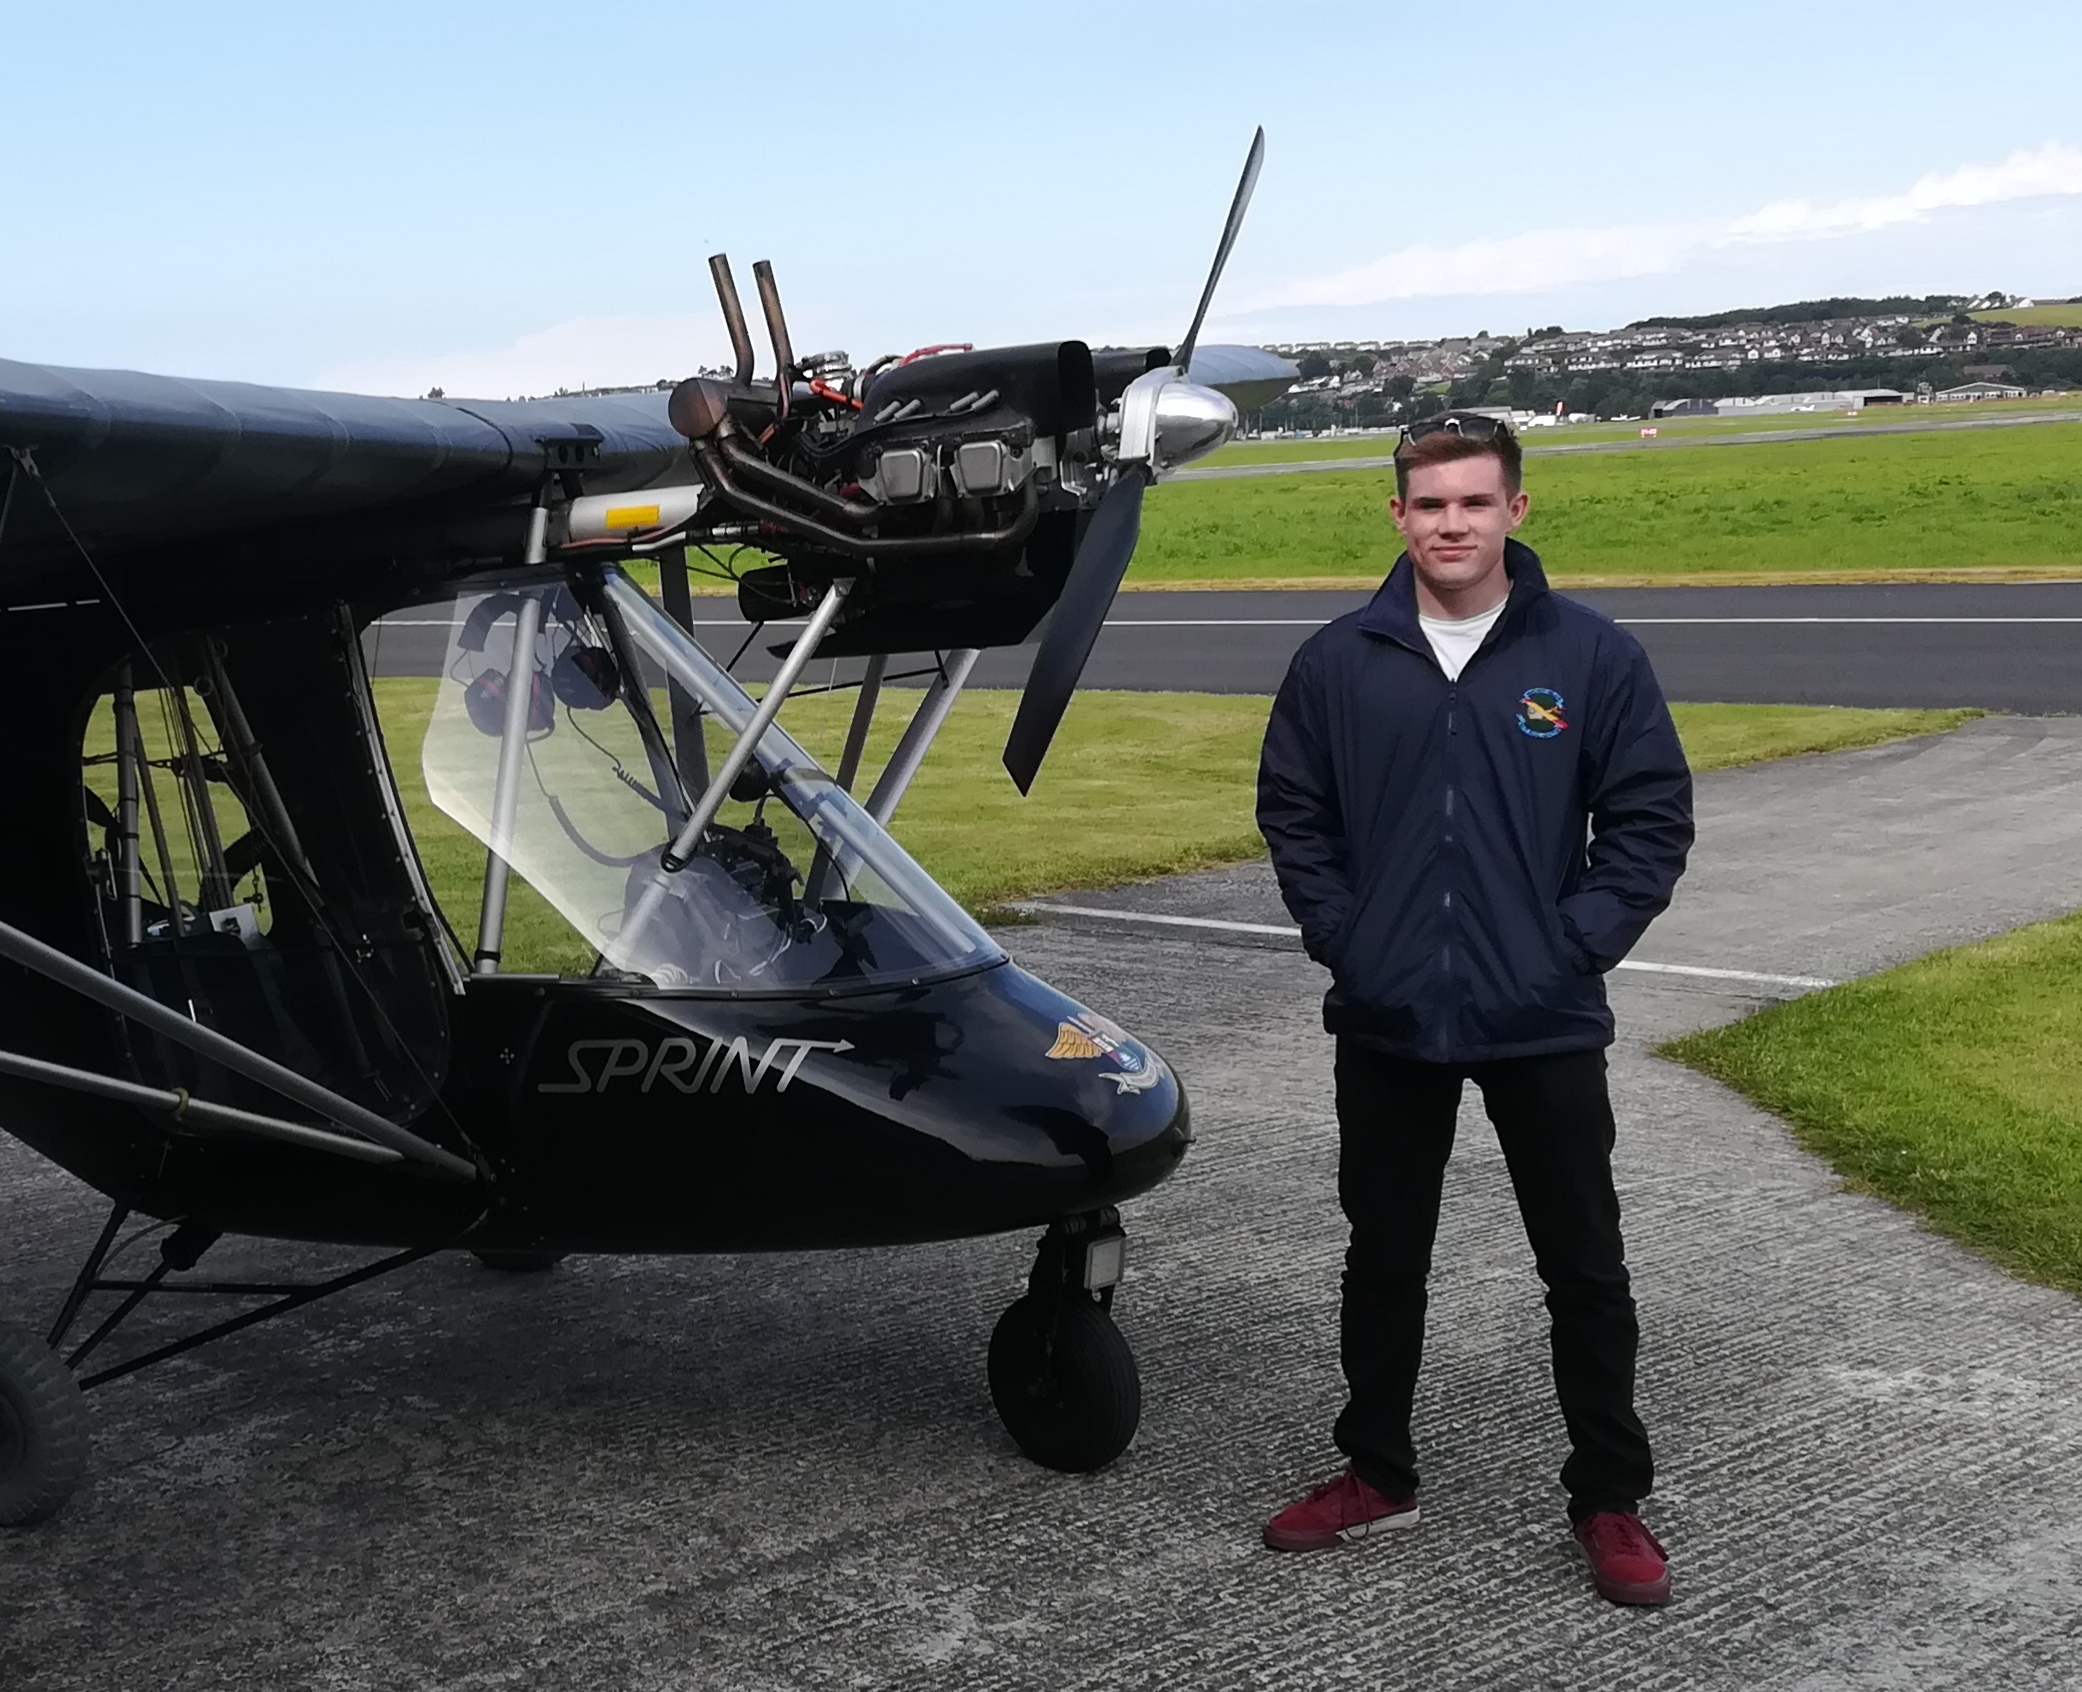 BMAA bursary results in Tom Martin getting his Pilot's License 